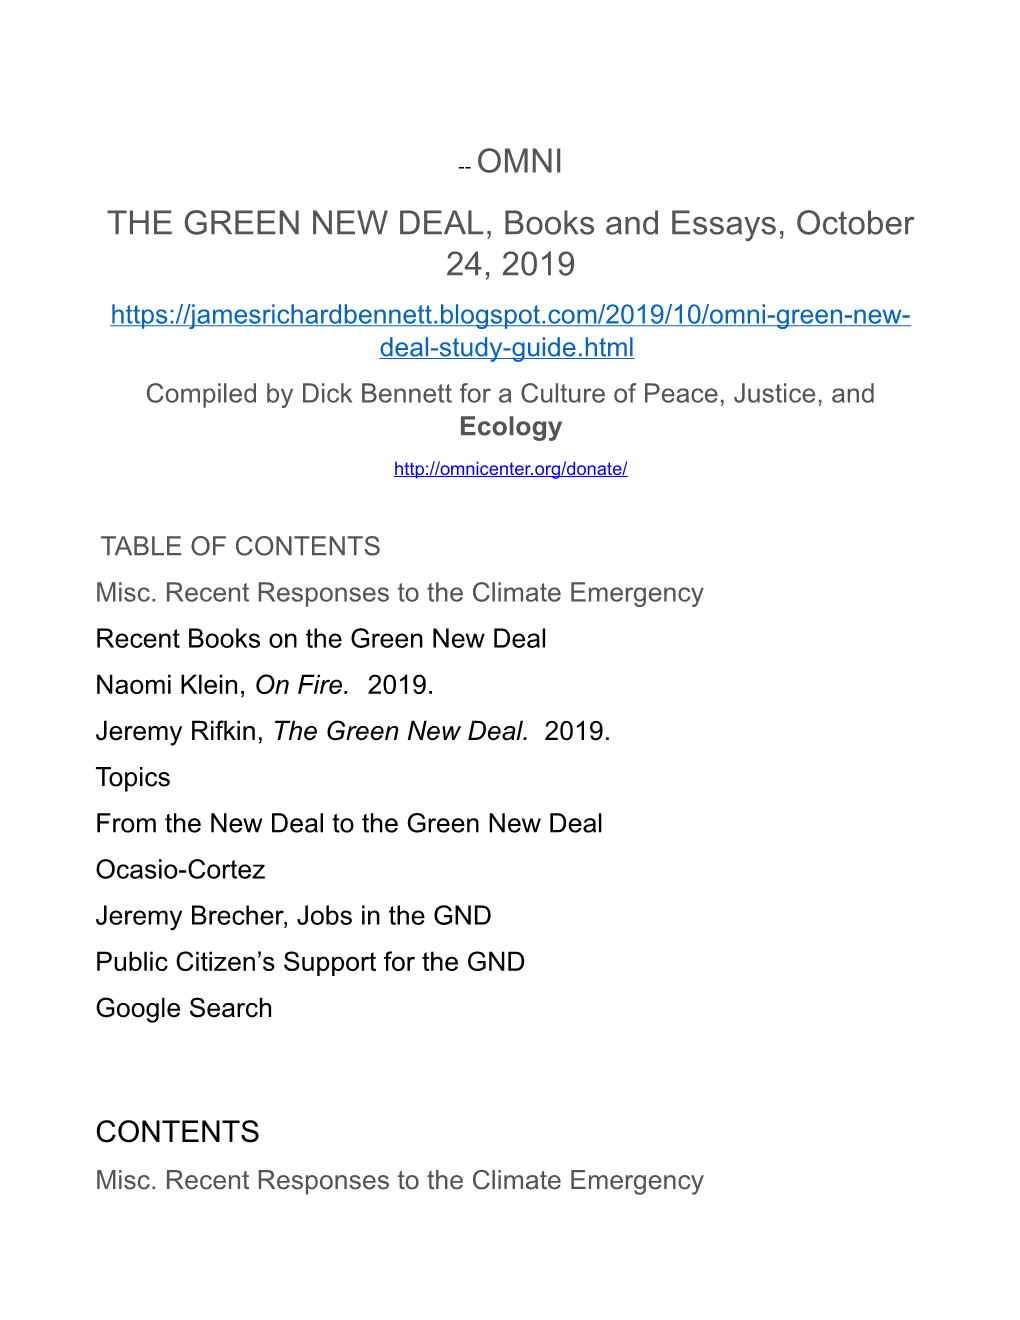 THE GREEN NEW DEAL, Books and Essays, OCTOBER 13 2019